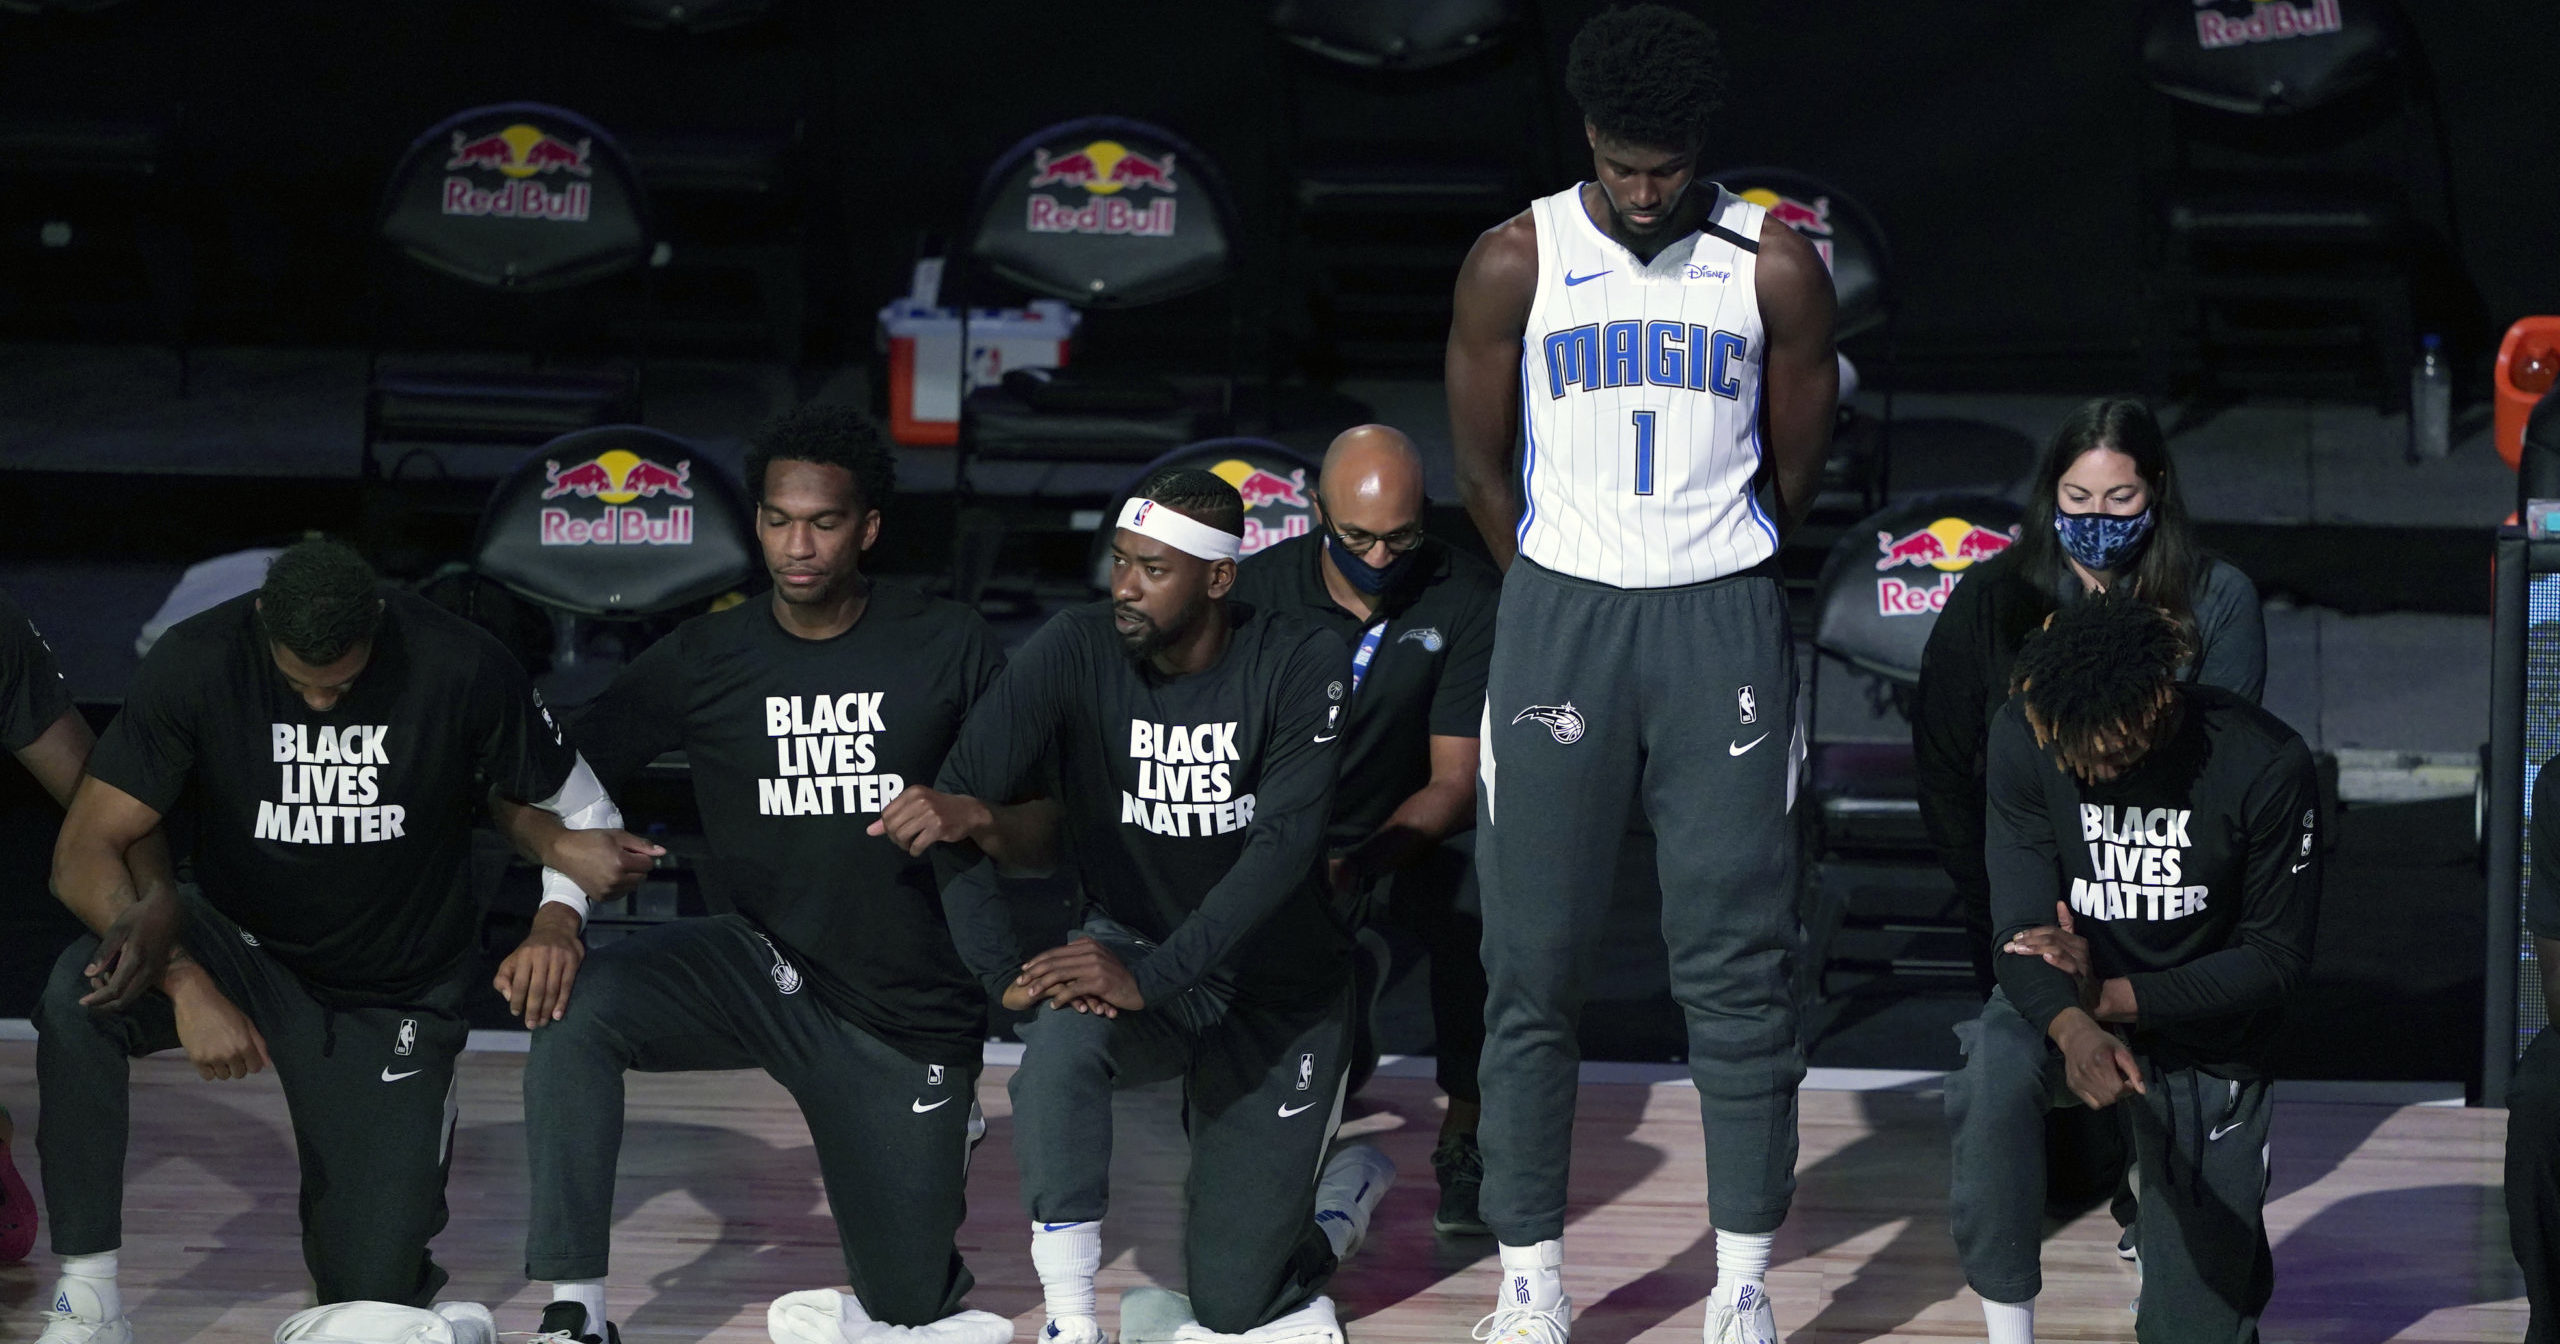 The Orlando Magic's Jonathan Isaac stands as others kneel during the national anthem before the start of an NBA basketball game between the Brooklyn Nets and the Orlando Magic on July 31, 2020, in Lake Buena Vista, Florida.